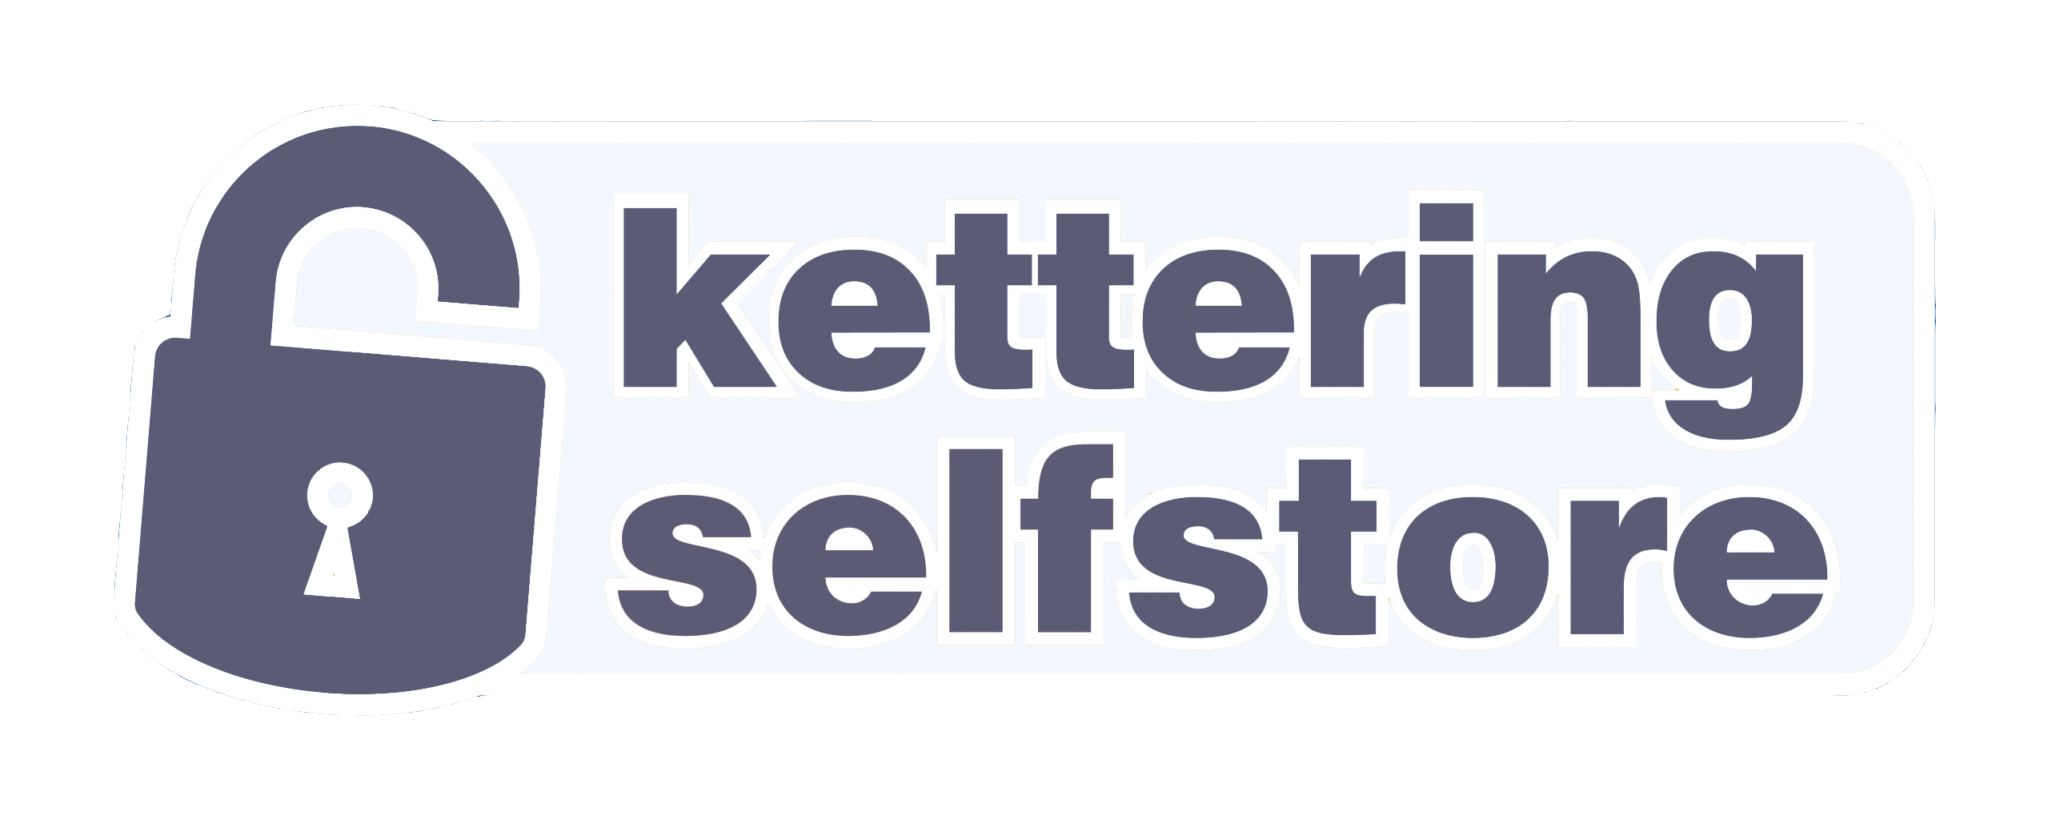 Kettering-Logo-with-background